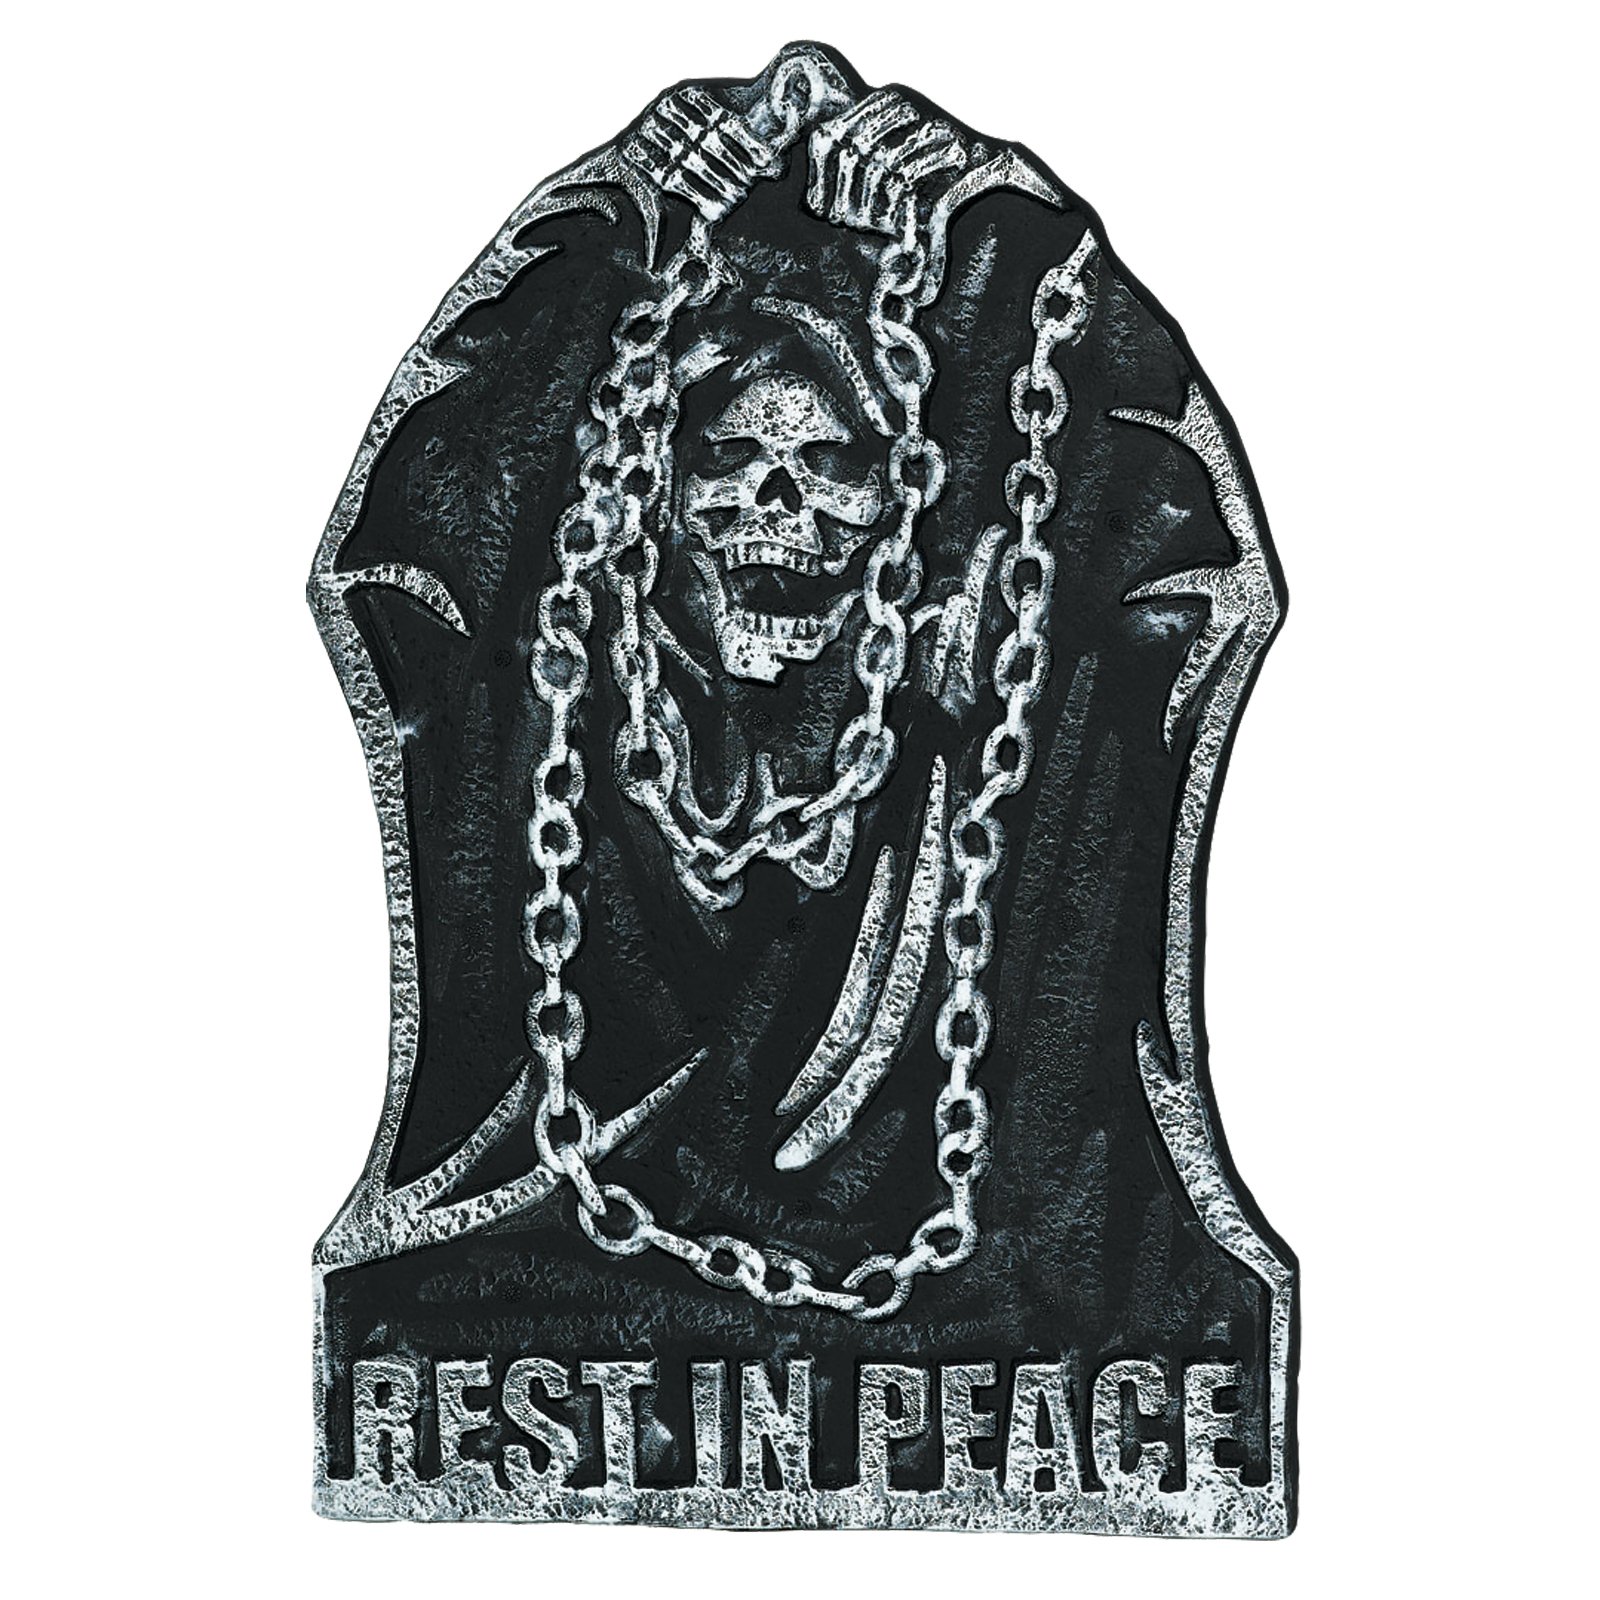 Discounted 22 Reaper RIP Tombstone Costume